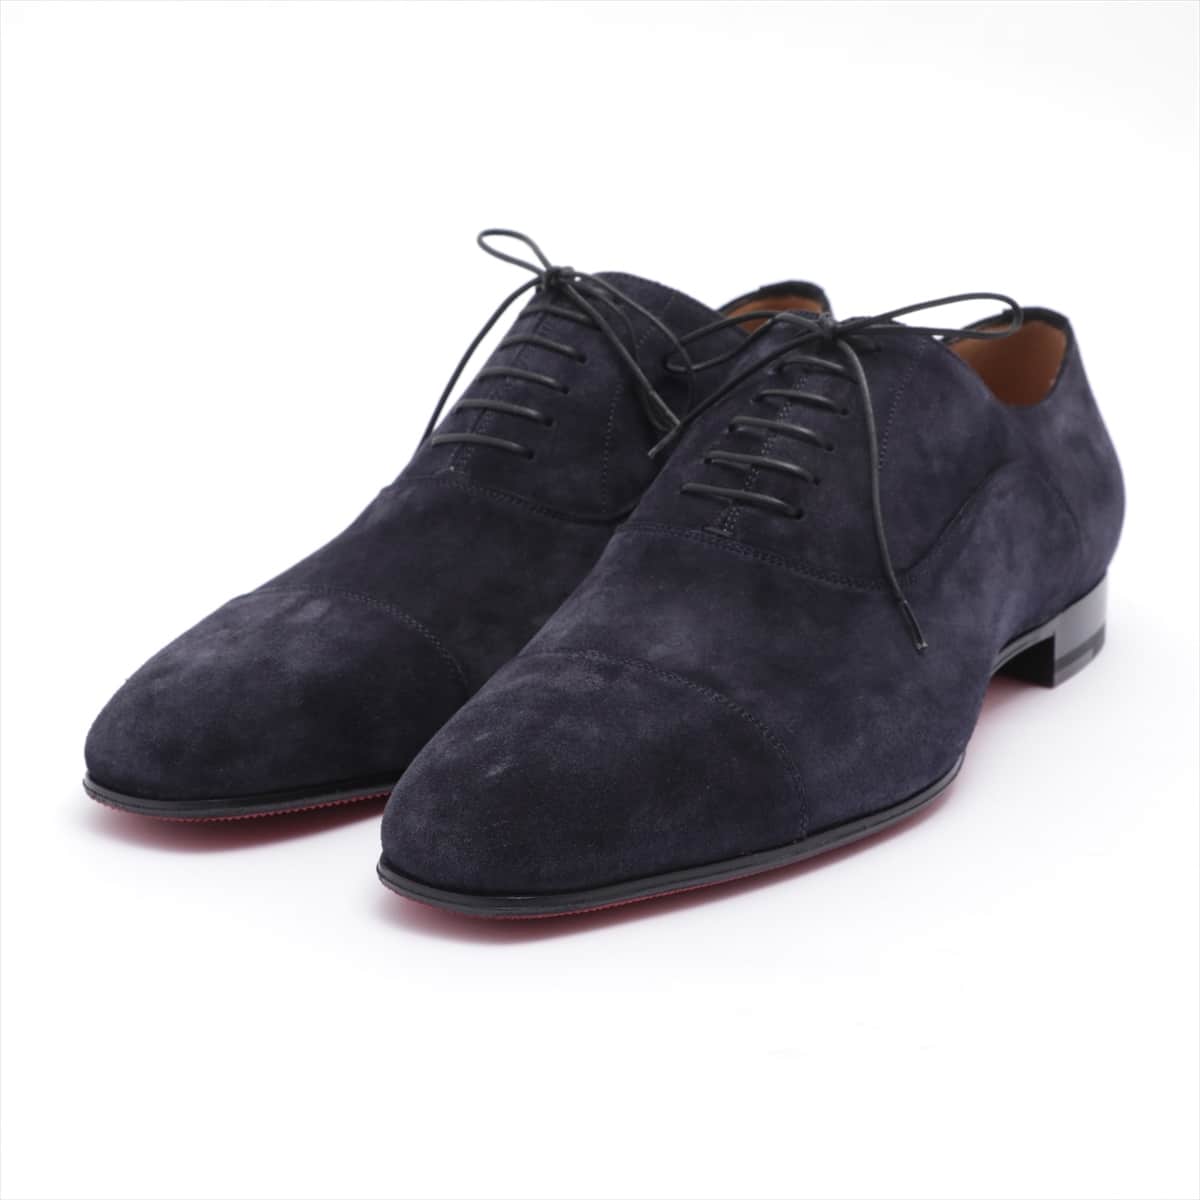 Christian Louboutin Suede Leather shoes 41 1/2 Men's Navy blue